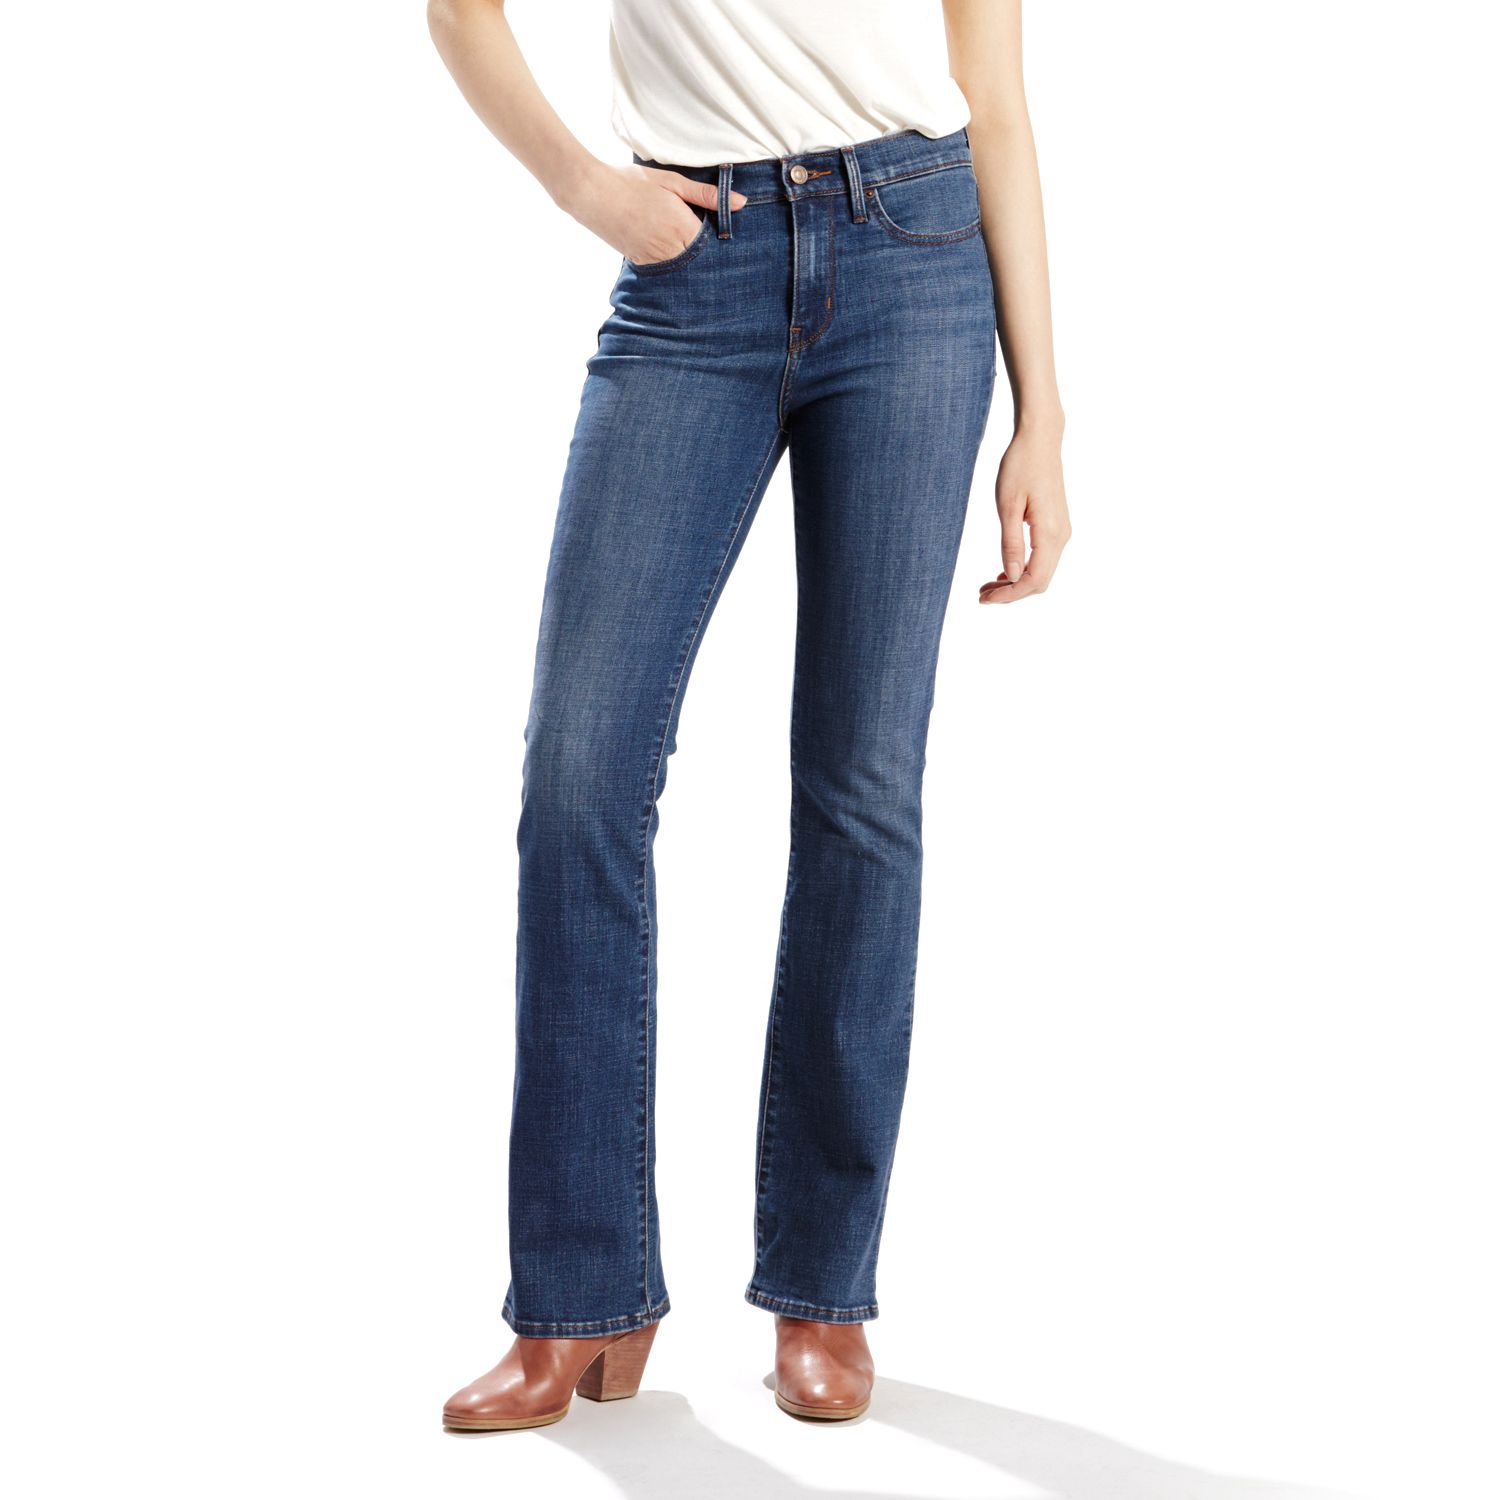 levi's slimming boot jeans